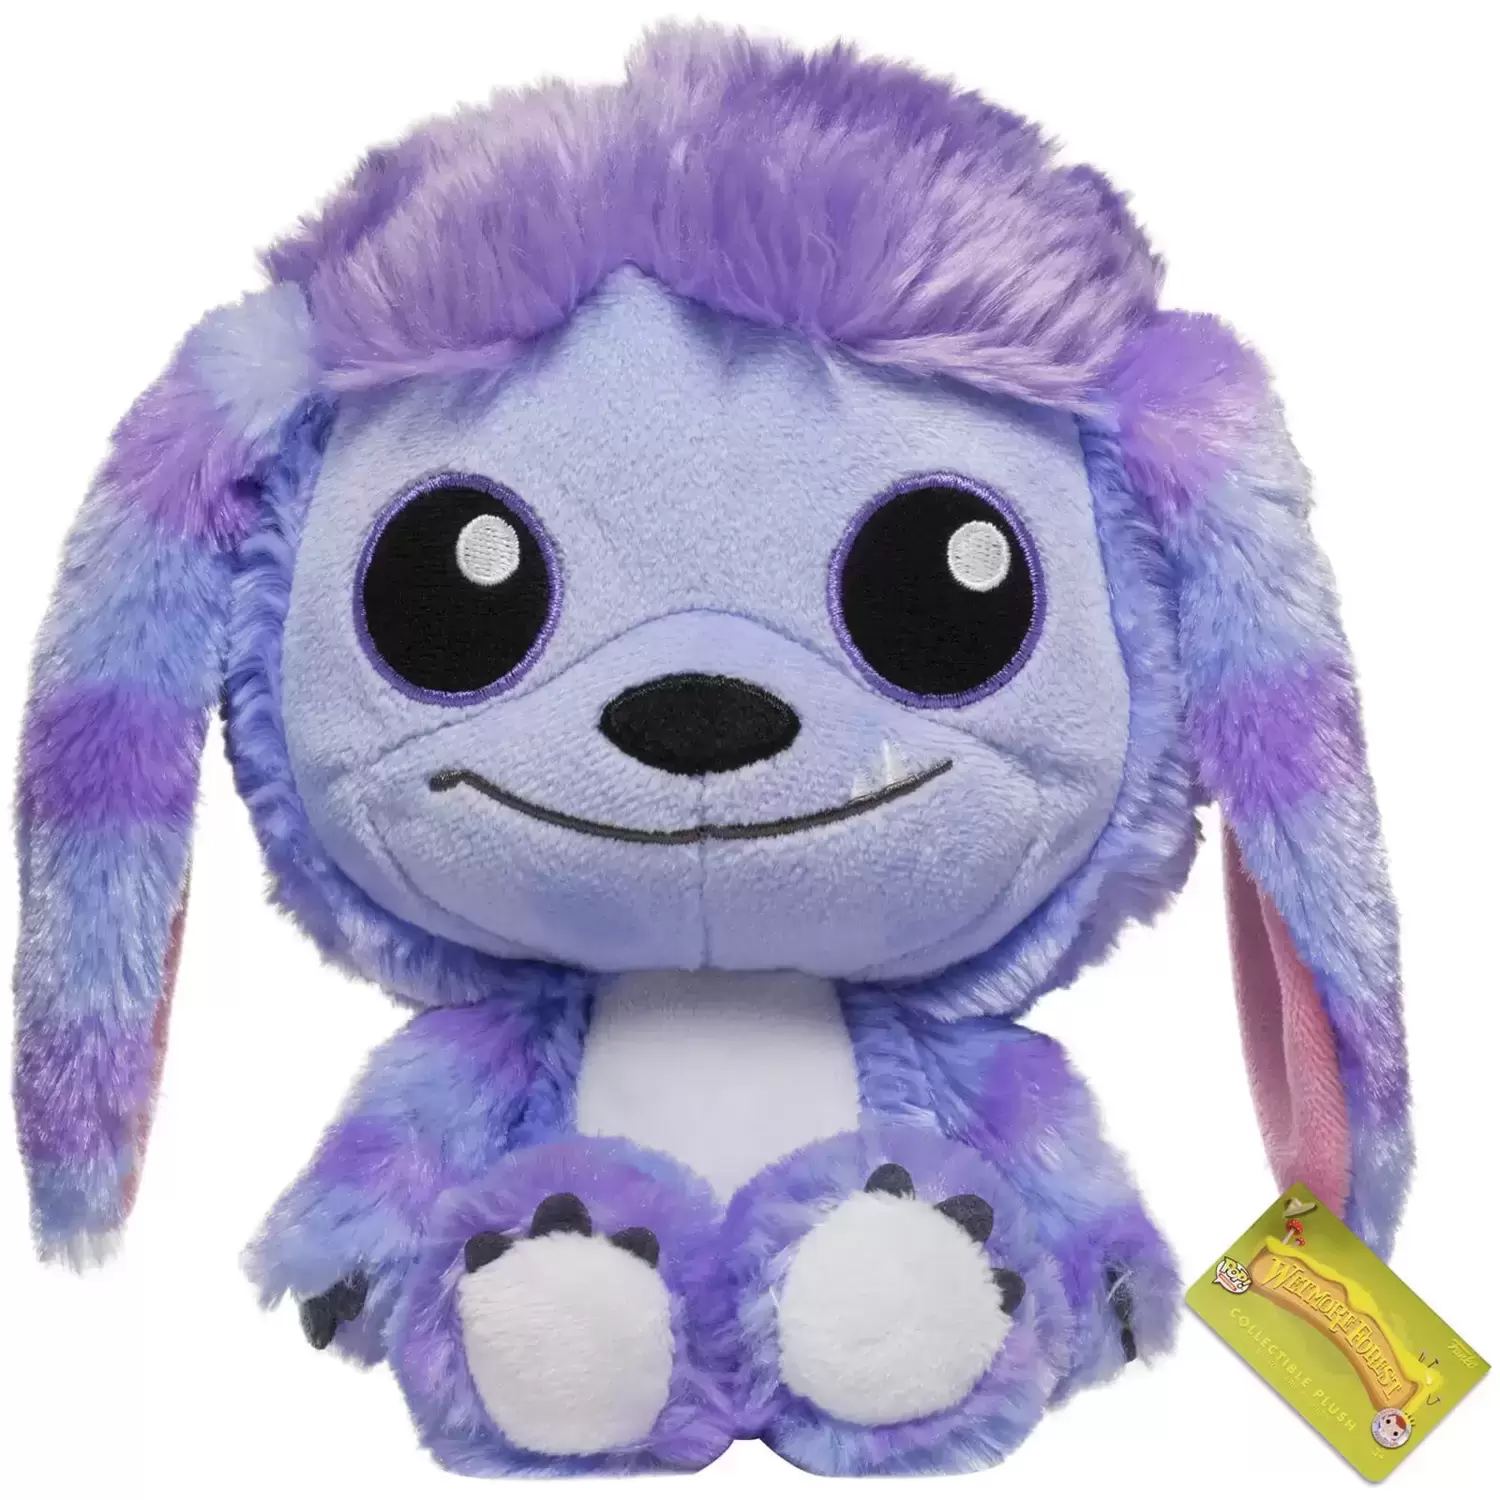 POP! Plush - Monsters - Snuggle Tooth